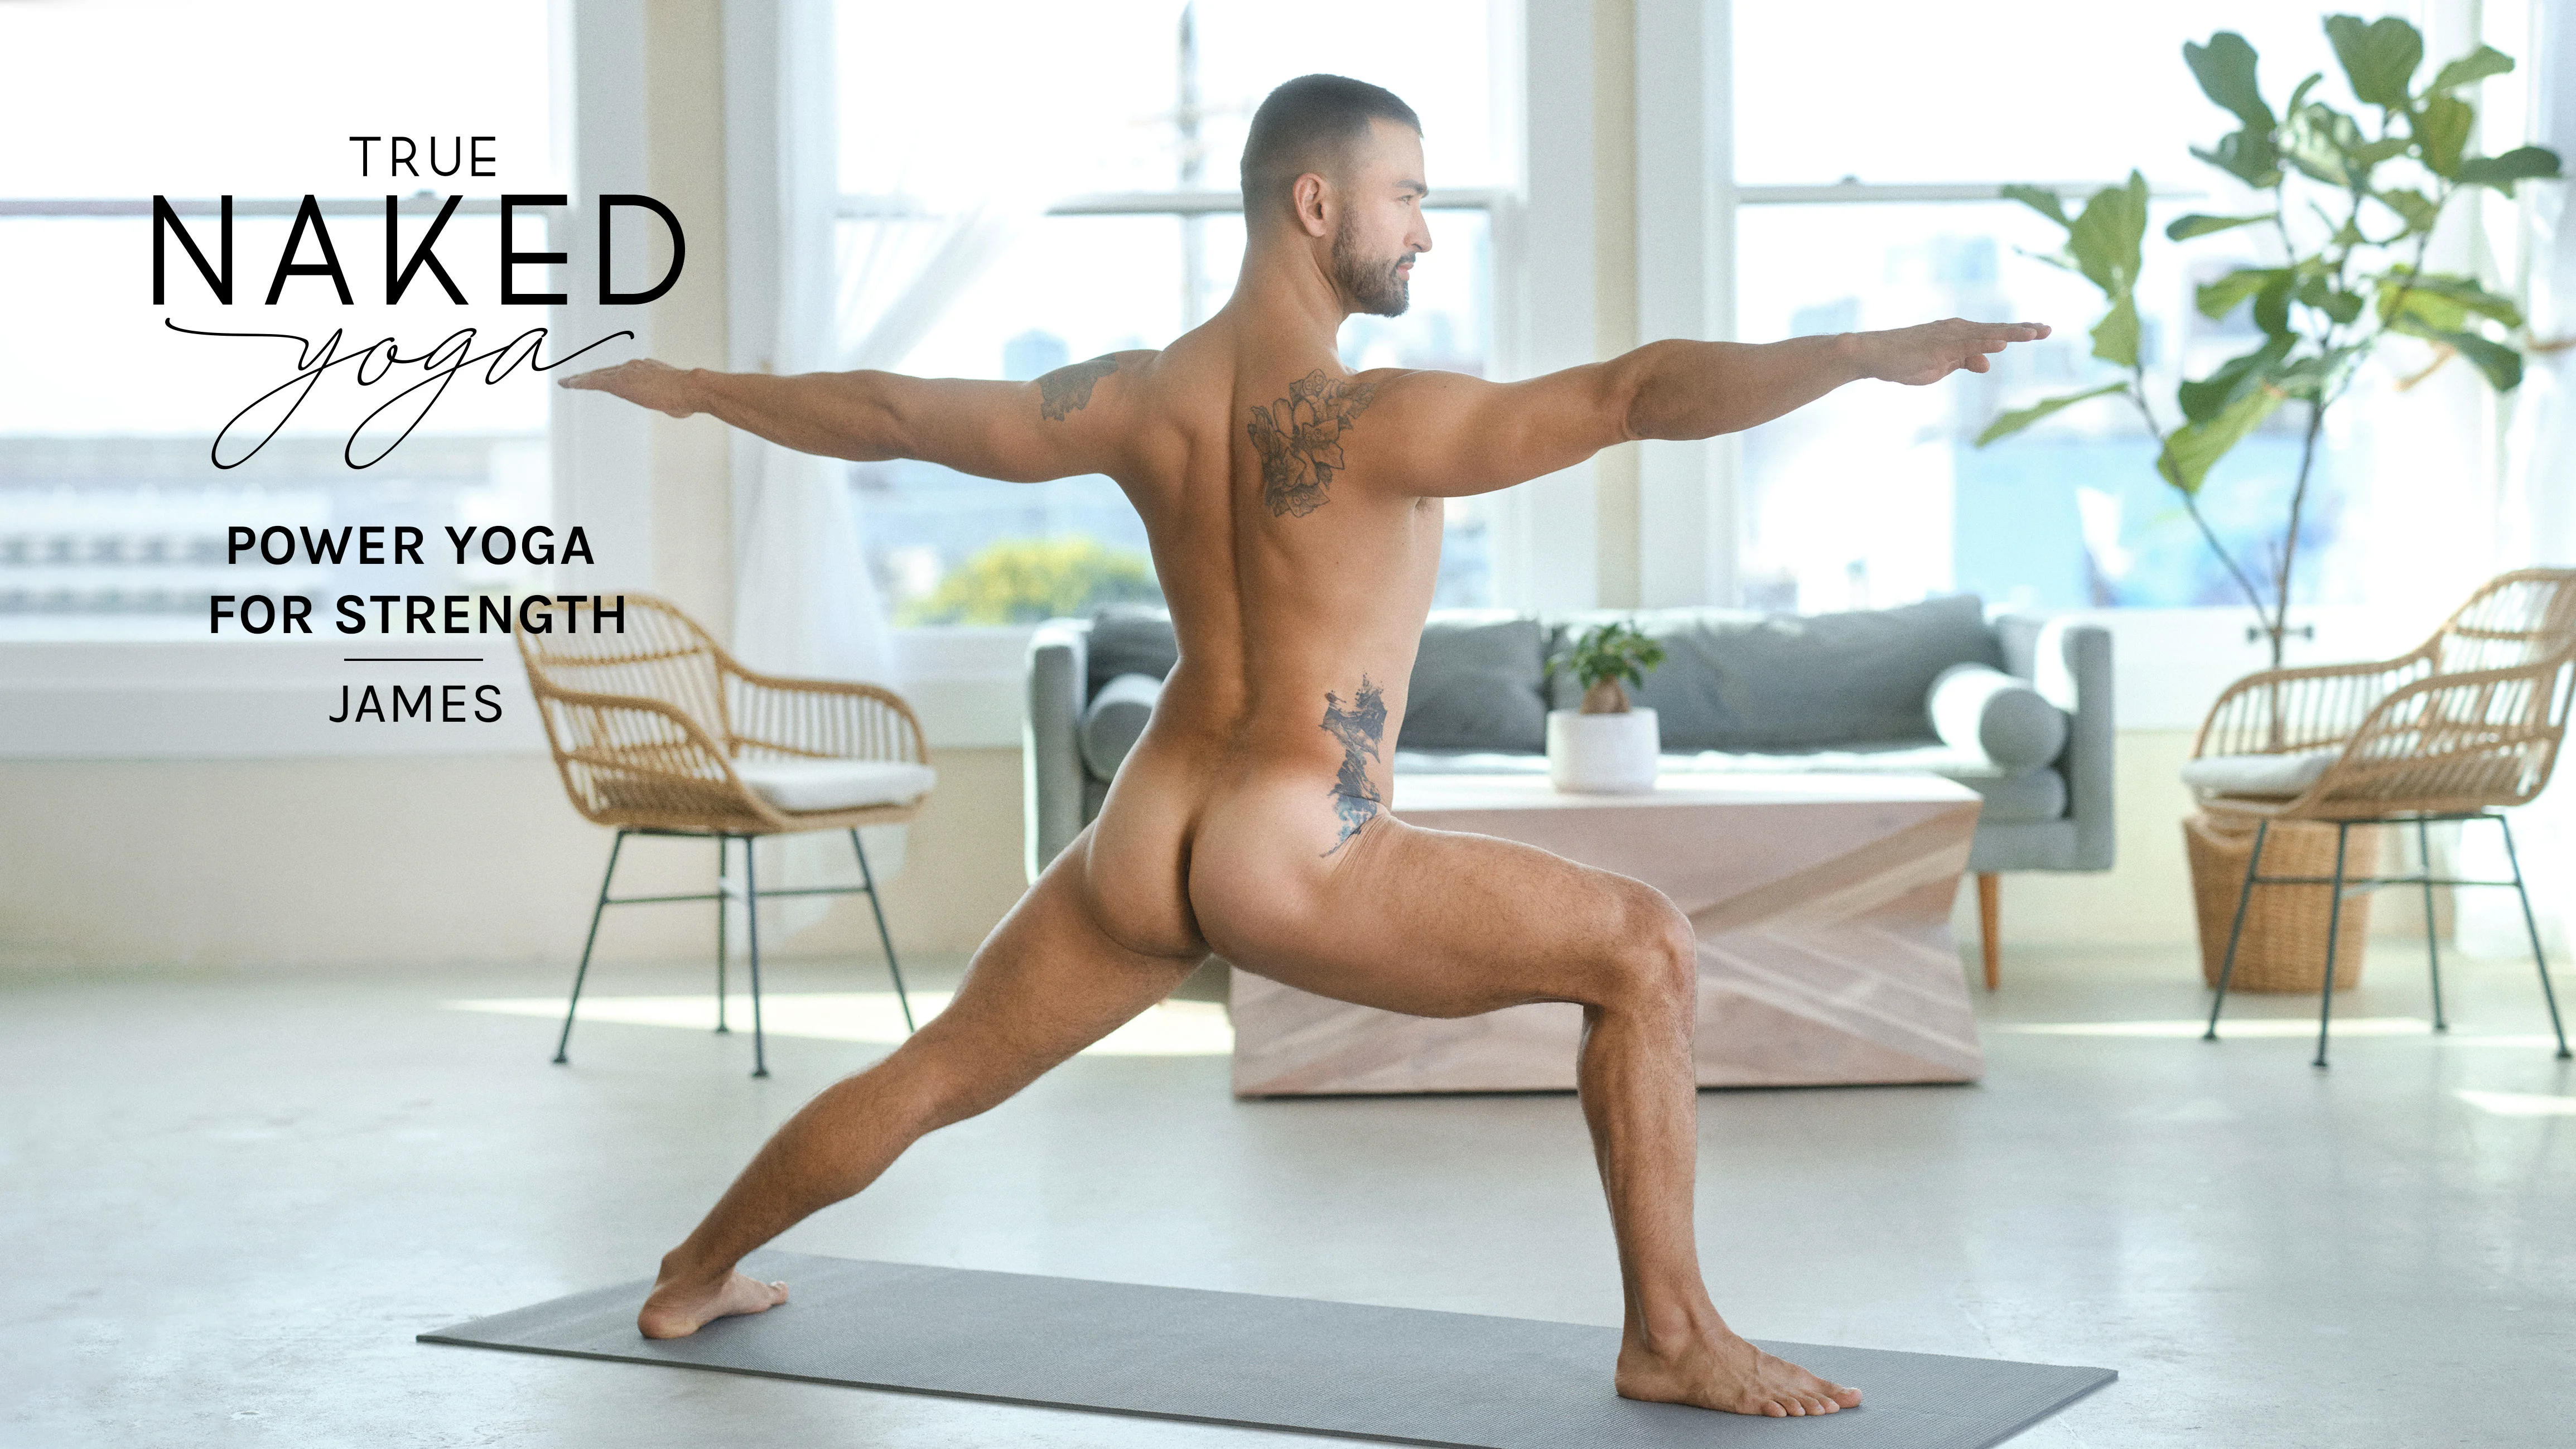 divyesh mittal recommends naked yoga full video pic